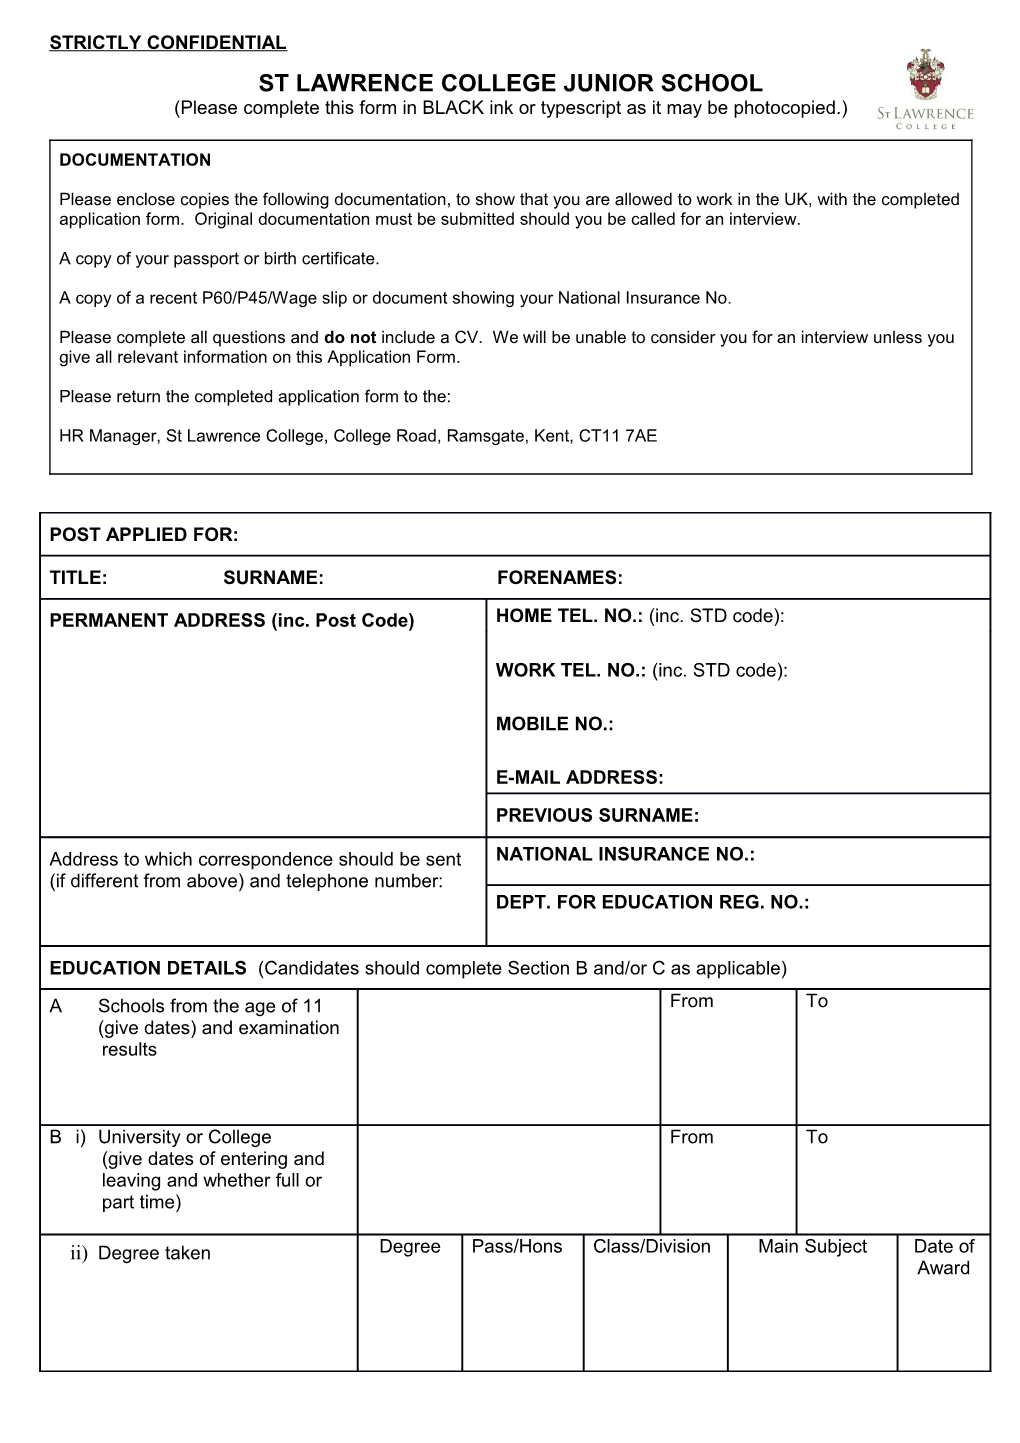 Please Complete This Form in BLACK Ink Or Typescript As It May Be Photocopied.